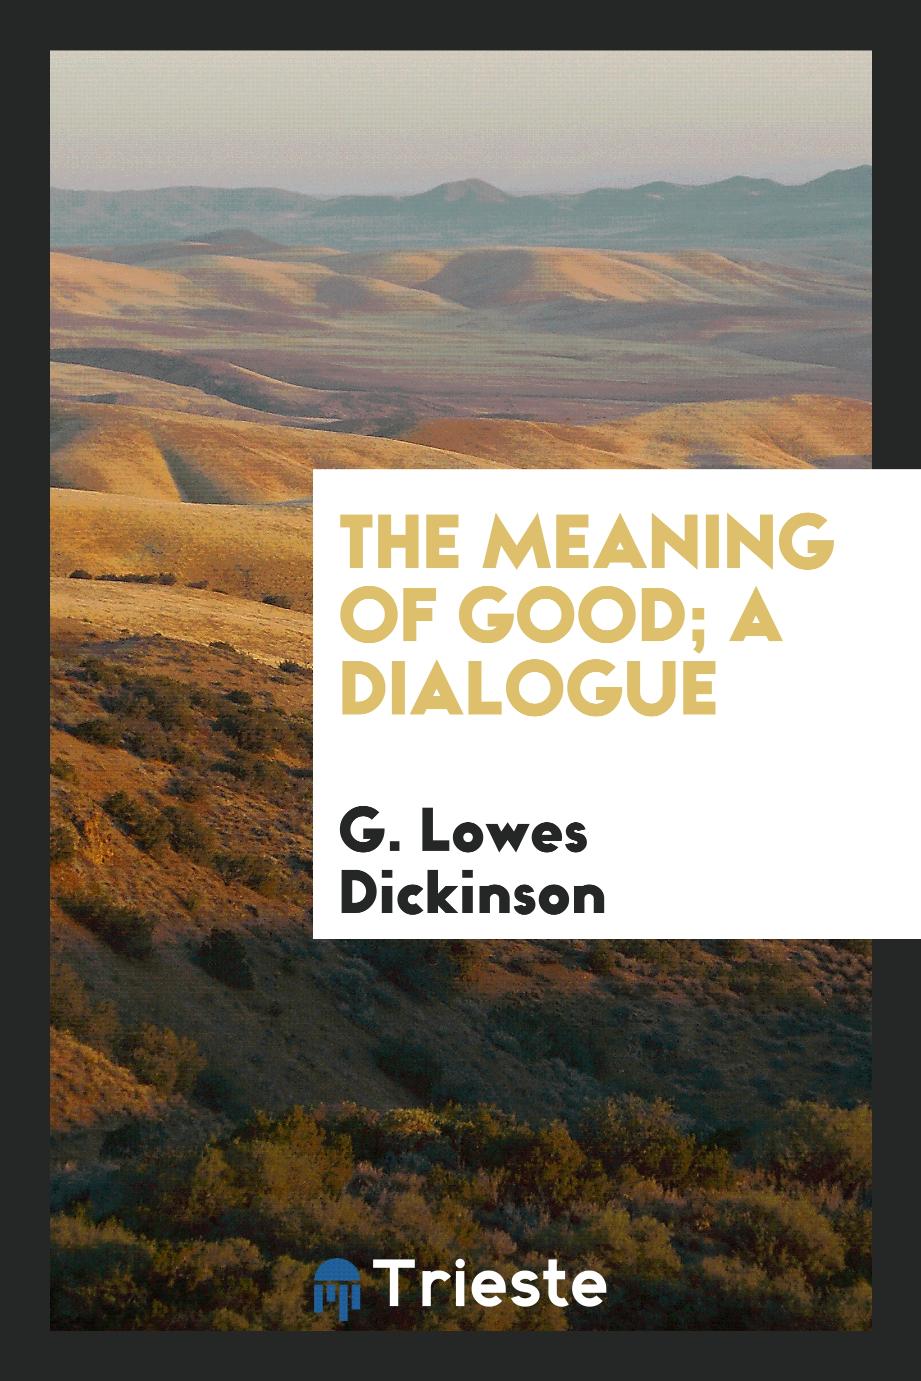 The meaning of good; a dialogue